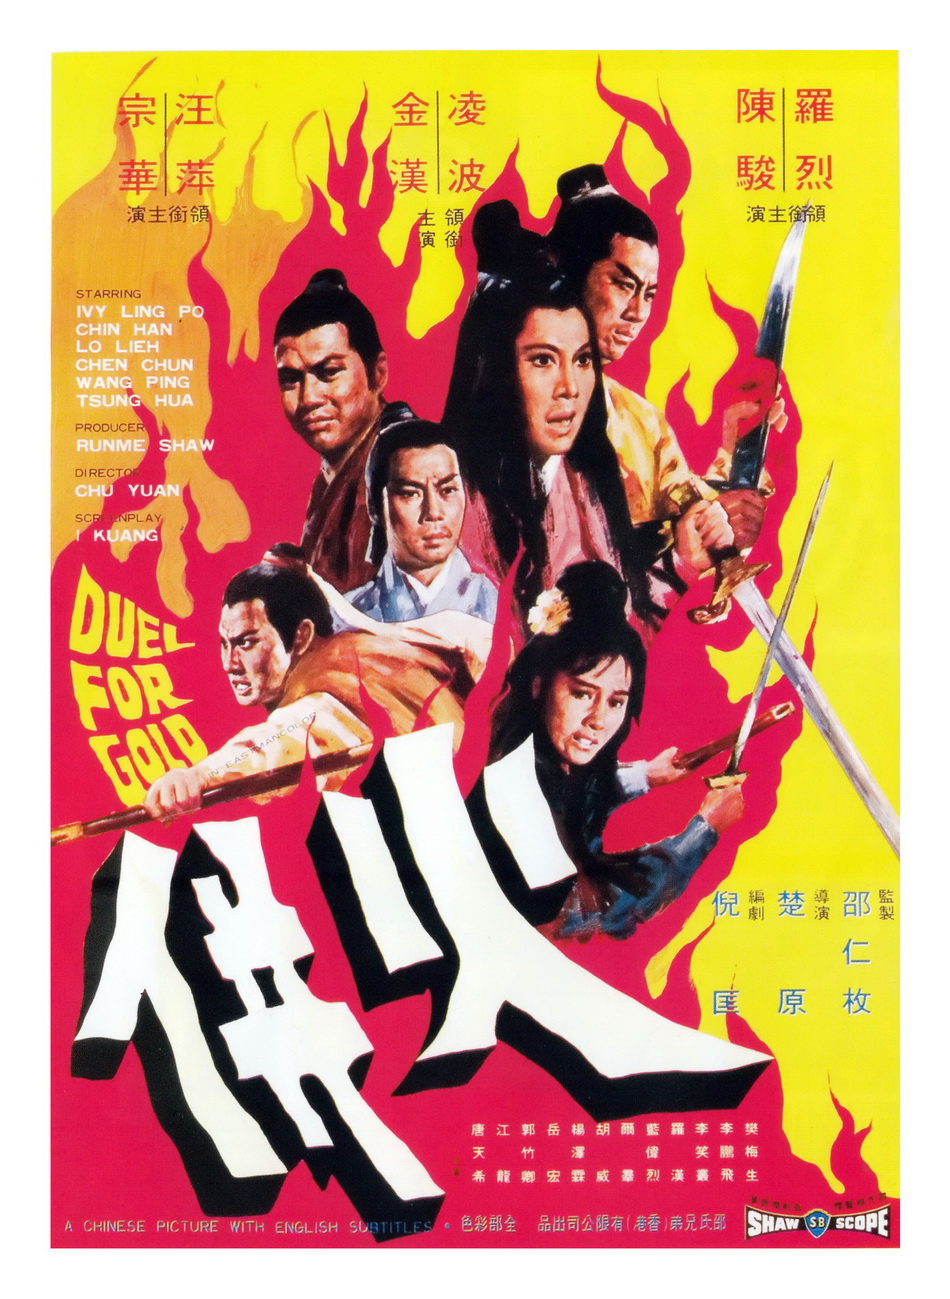 Huo bing (1971) with English Subtitles on DVD on DVD